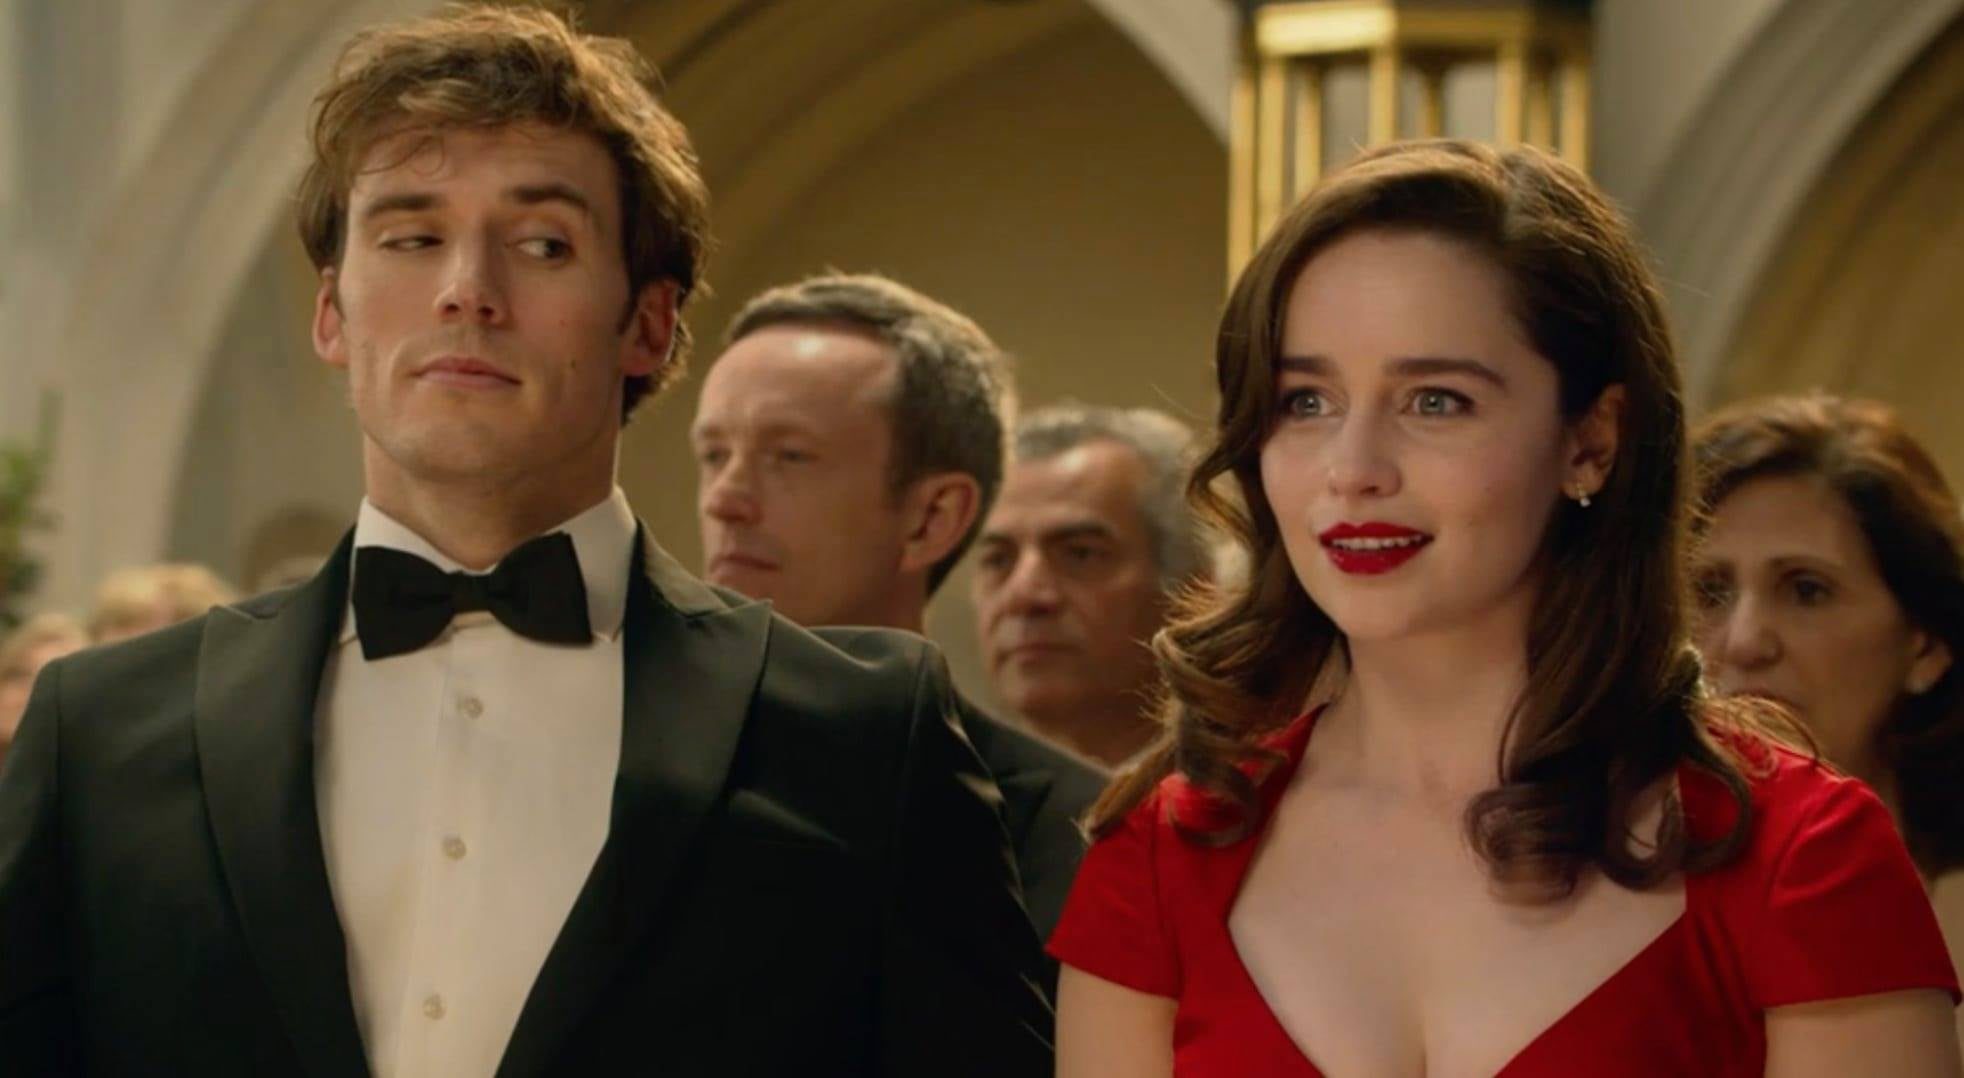 Me Before You 2016